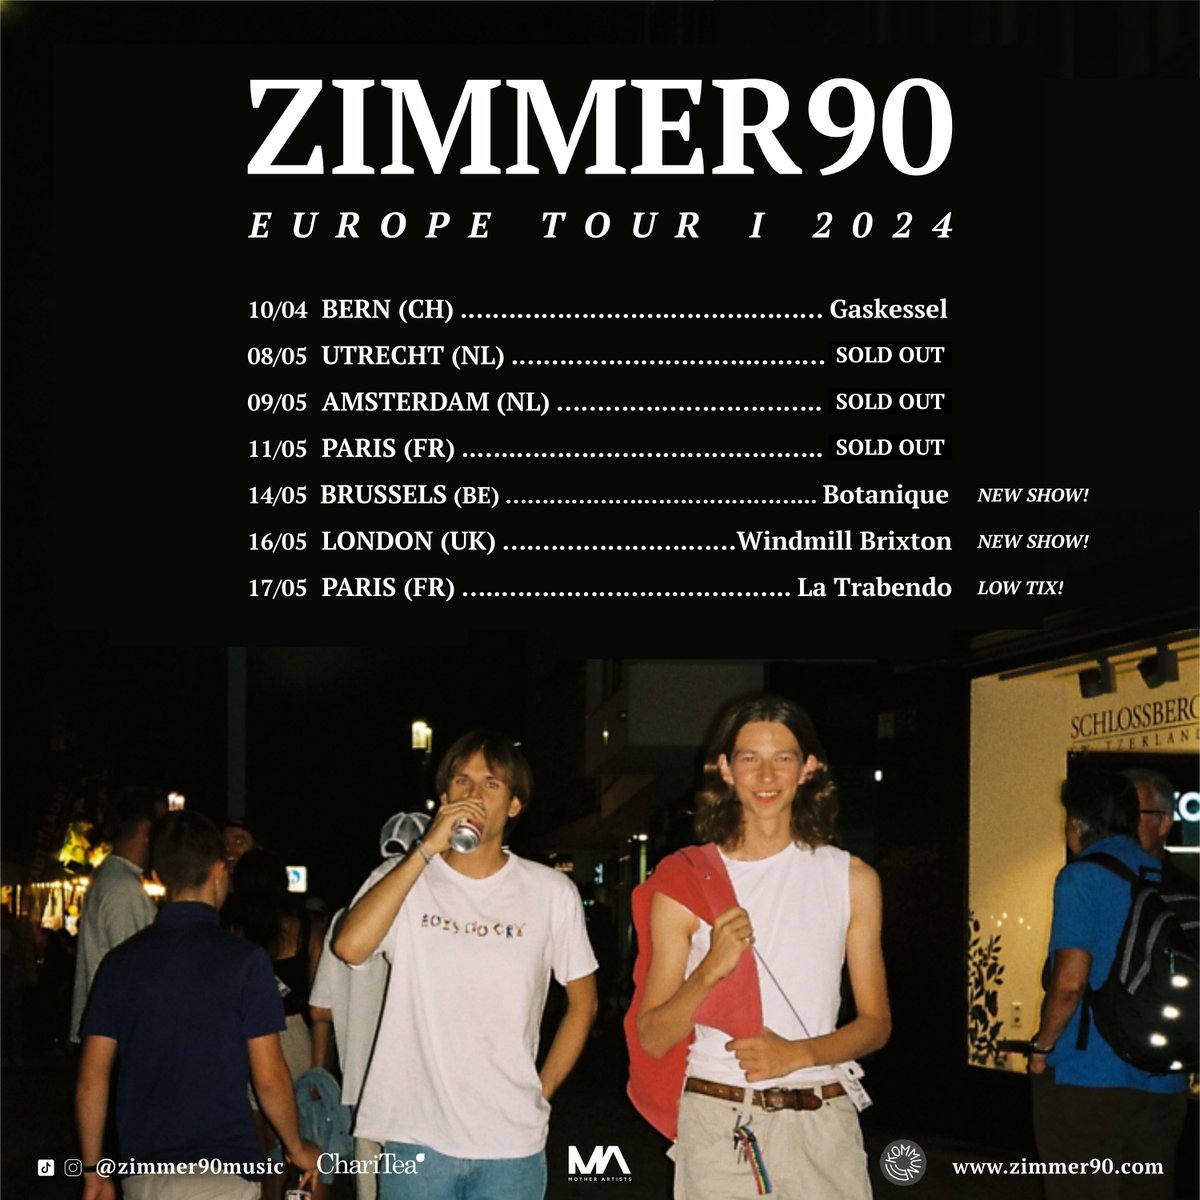 Announcing the UK debut show for German alt.pop sensations @zimmer90music on 16 May. Tickets go on sale this Wednesday at 10am and are expected to fly out.